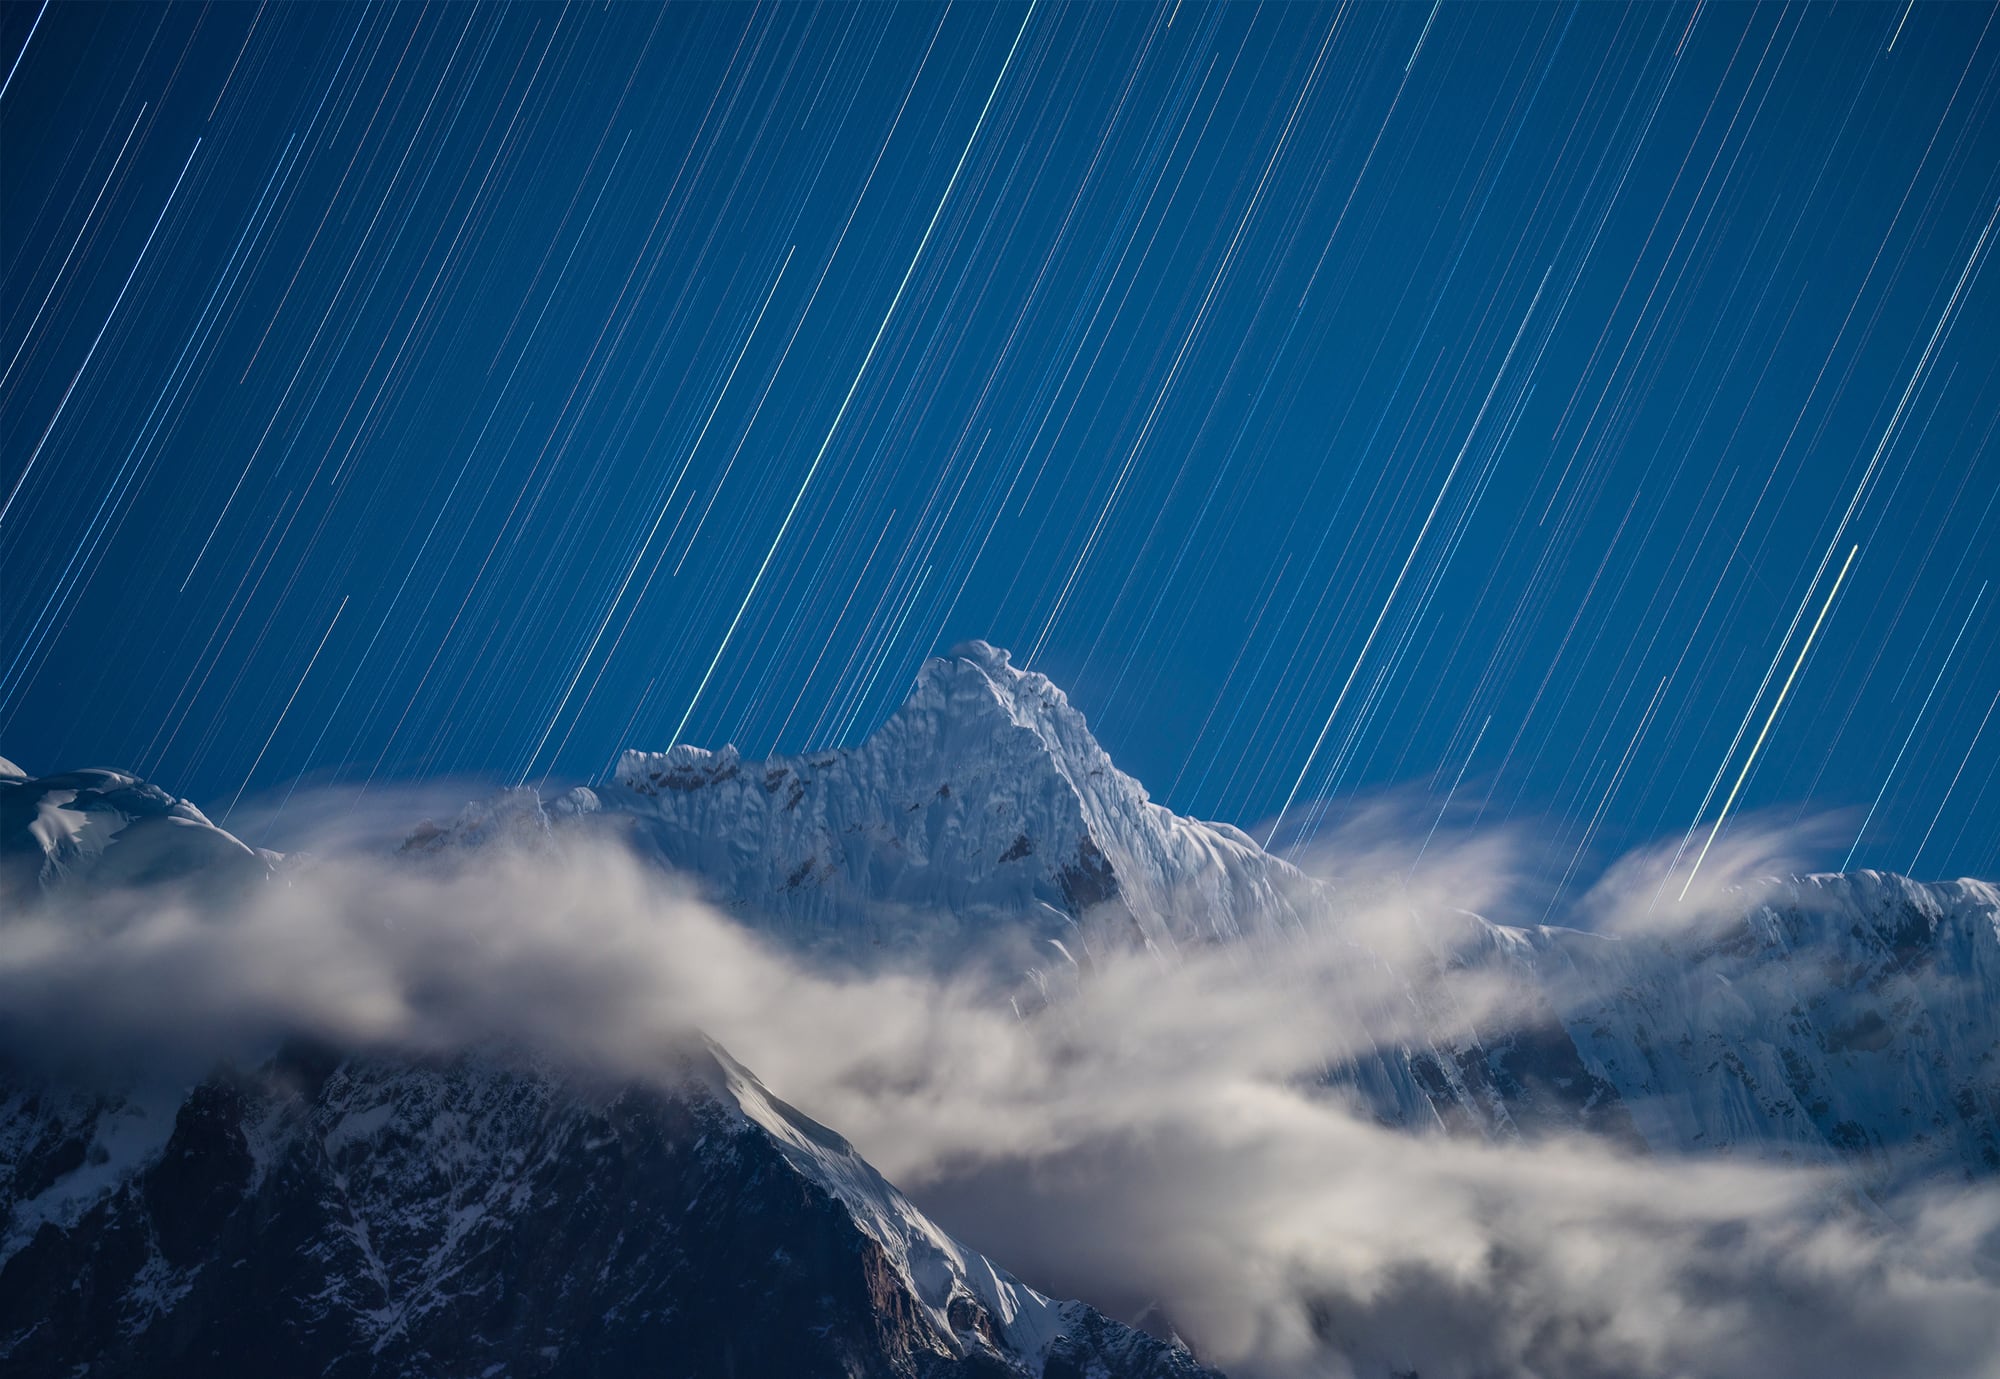 Photography Night Nature Landscape Stars Long Exposure Light Trails Mountains Snowy Mountain Clouds  2000x1379